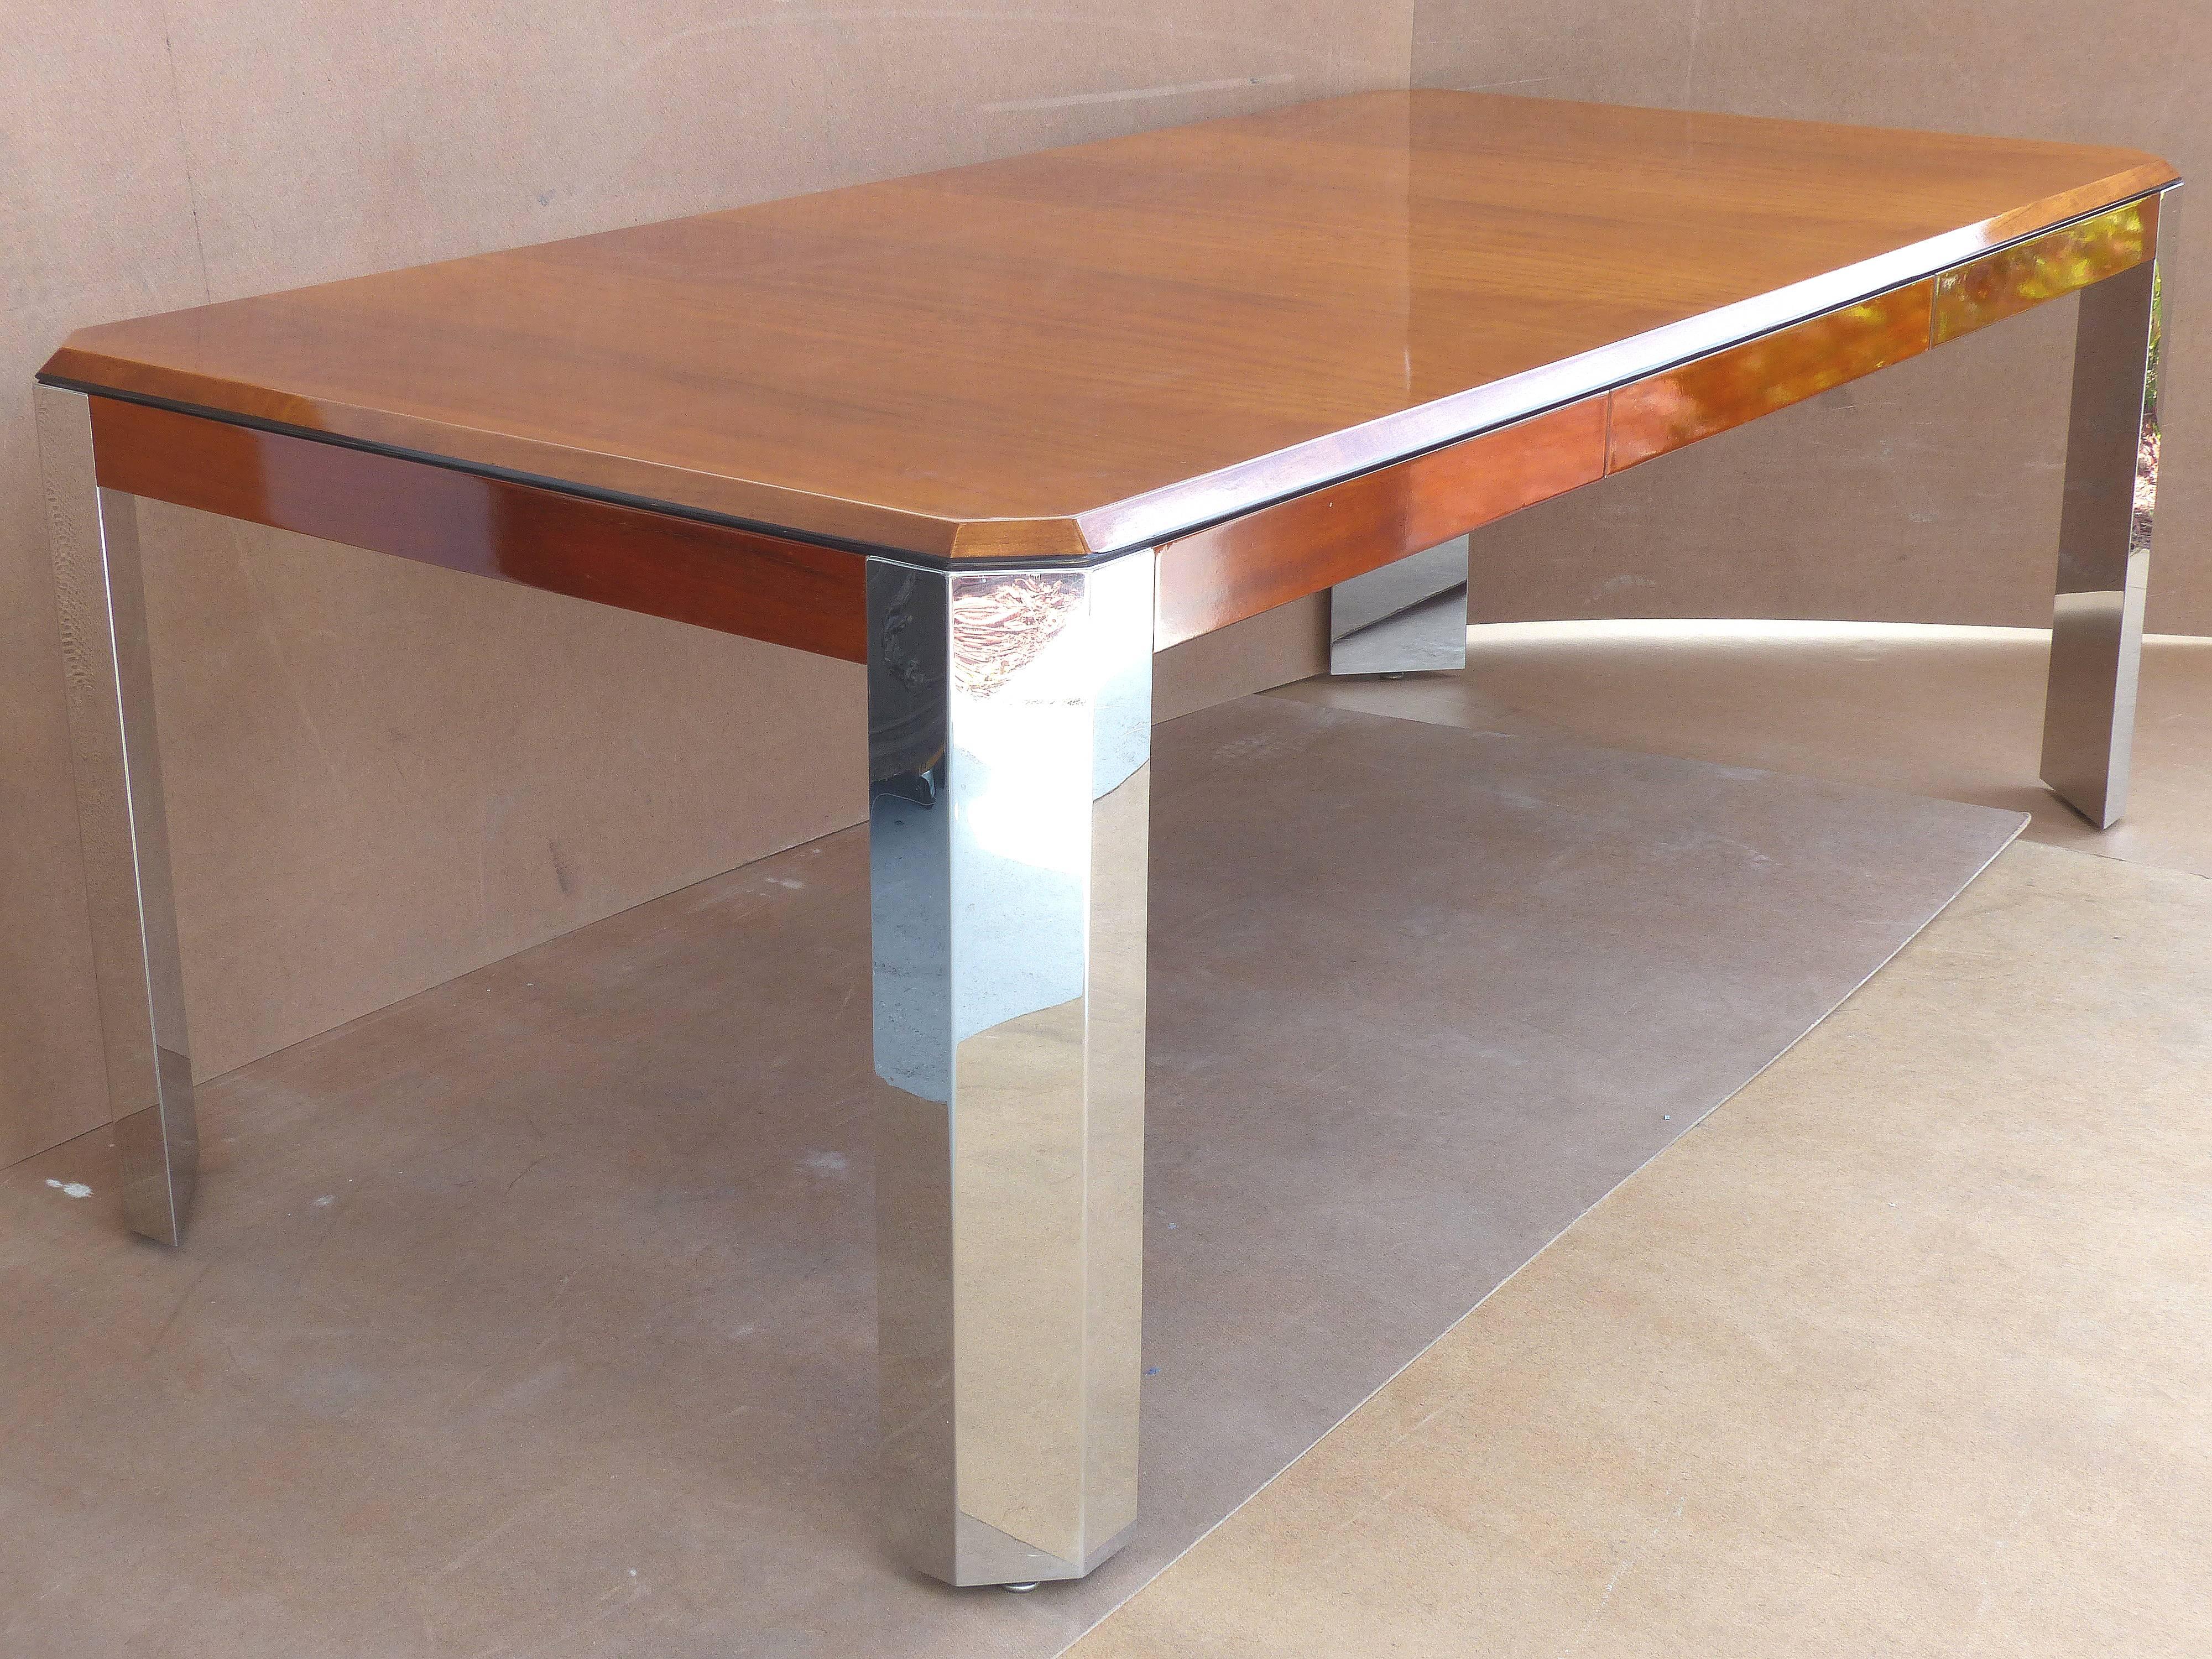 Mid-Century Leon Rosen Pace Collection Desk

An elegant, Mid-Century Modern desk or dining table constructed of blond mahogany, with stainless steel legs featuring a unique, trapezoidal shape. Designed by Leon Rosen for the Pace collection. This